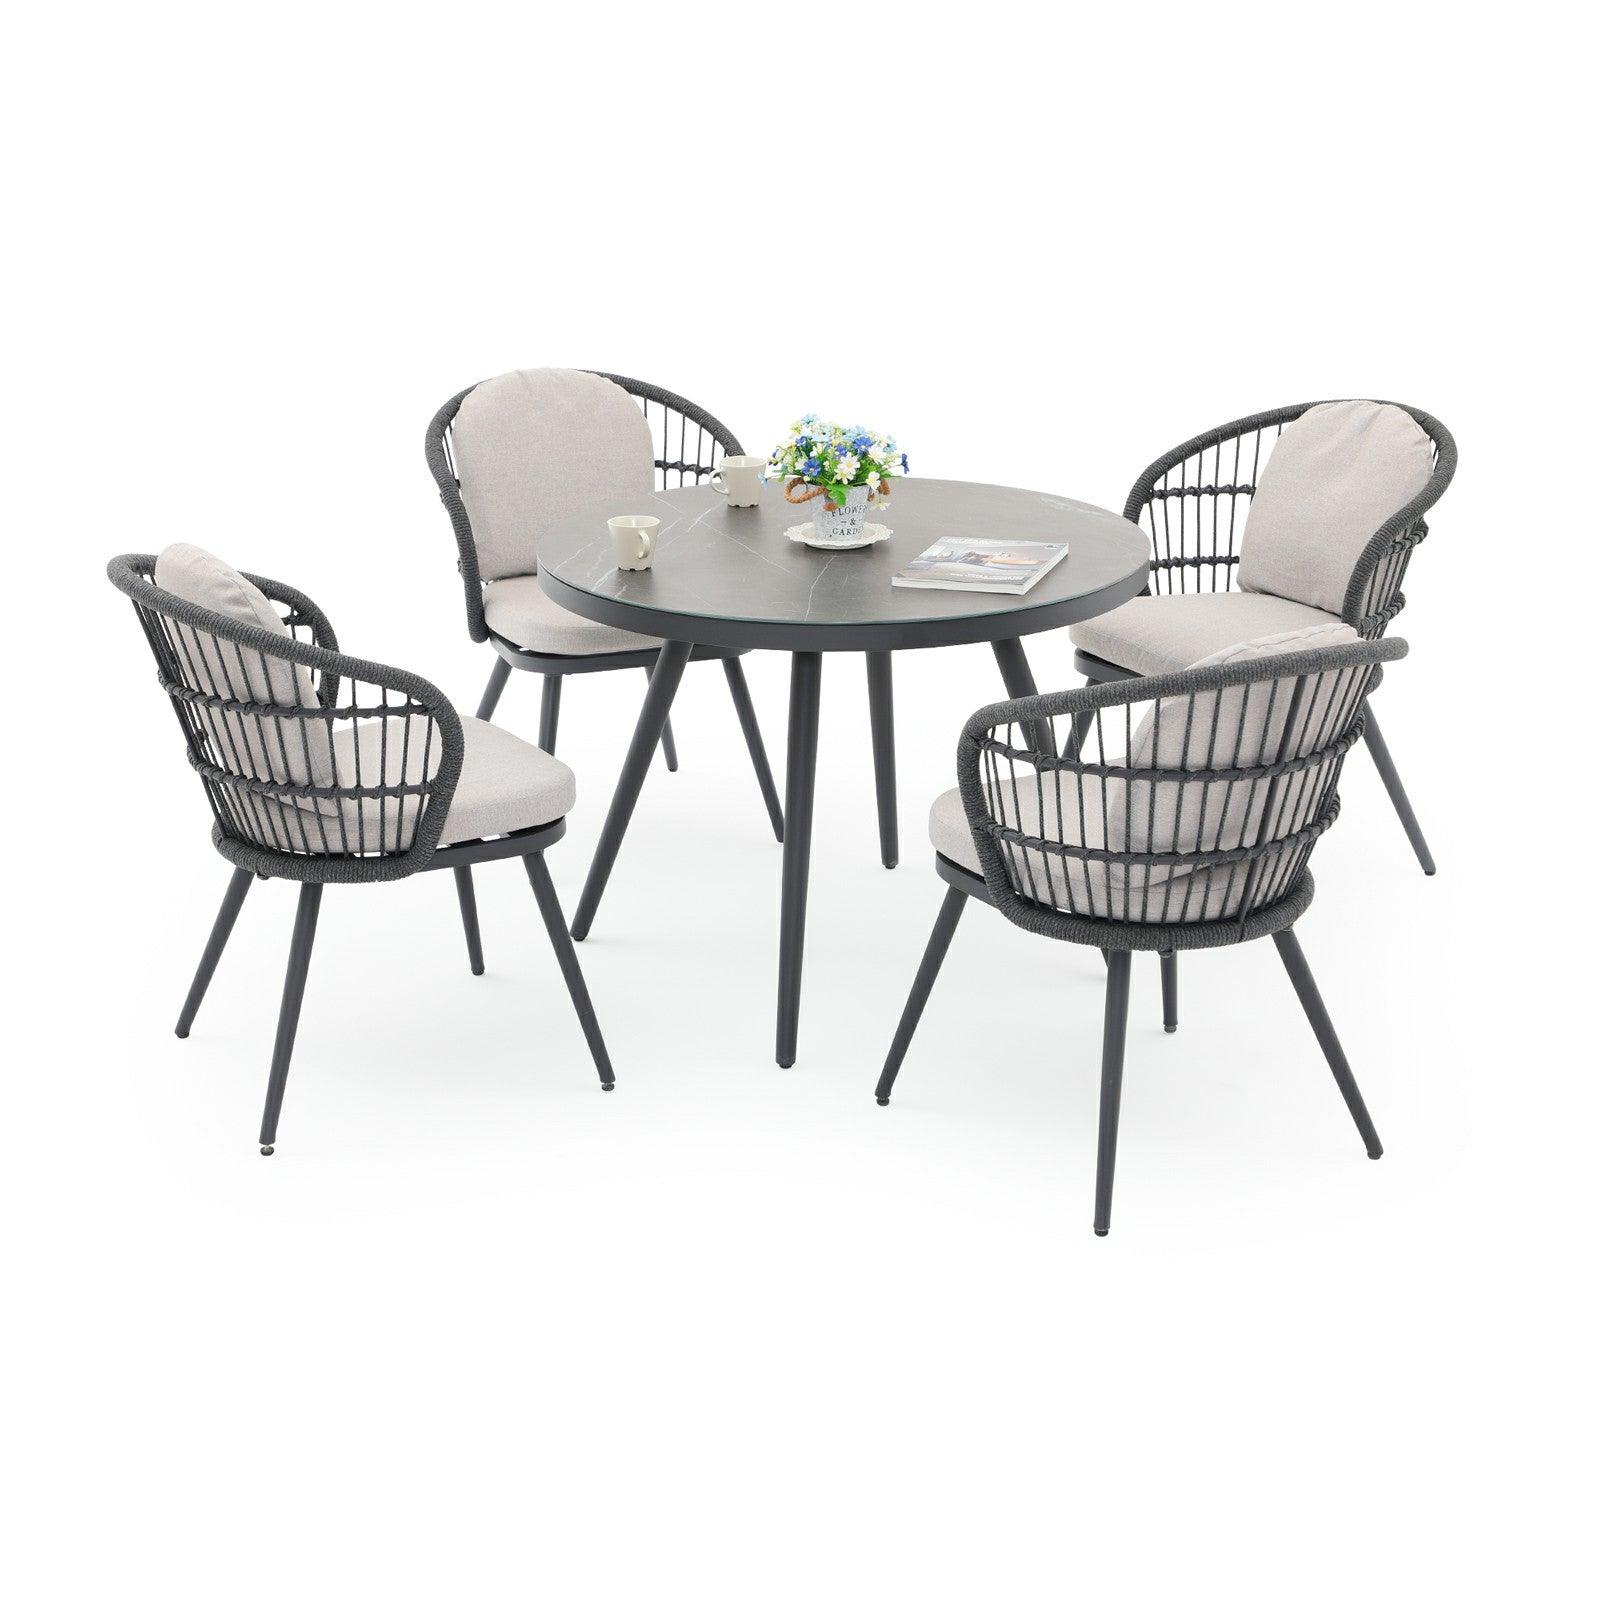 Comino Aluminum 4-Person Patio Dining Set with Round Table